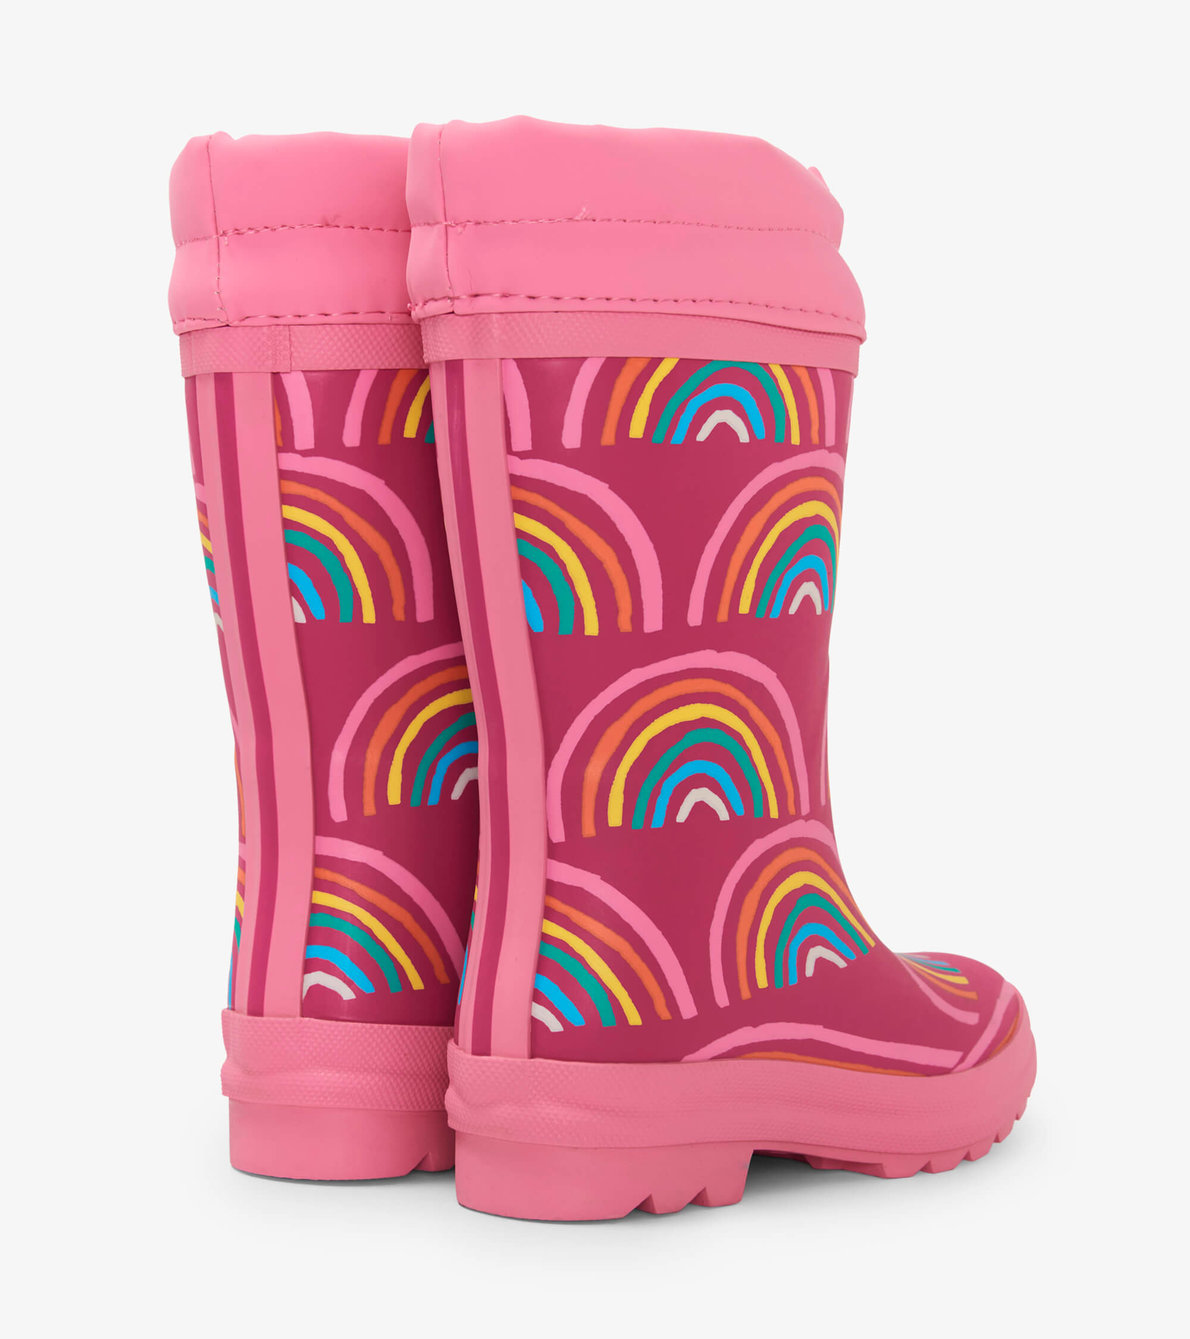 View larger image of Rainy Rainbows Sherpa Lined Rain Boots